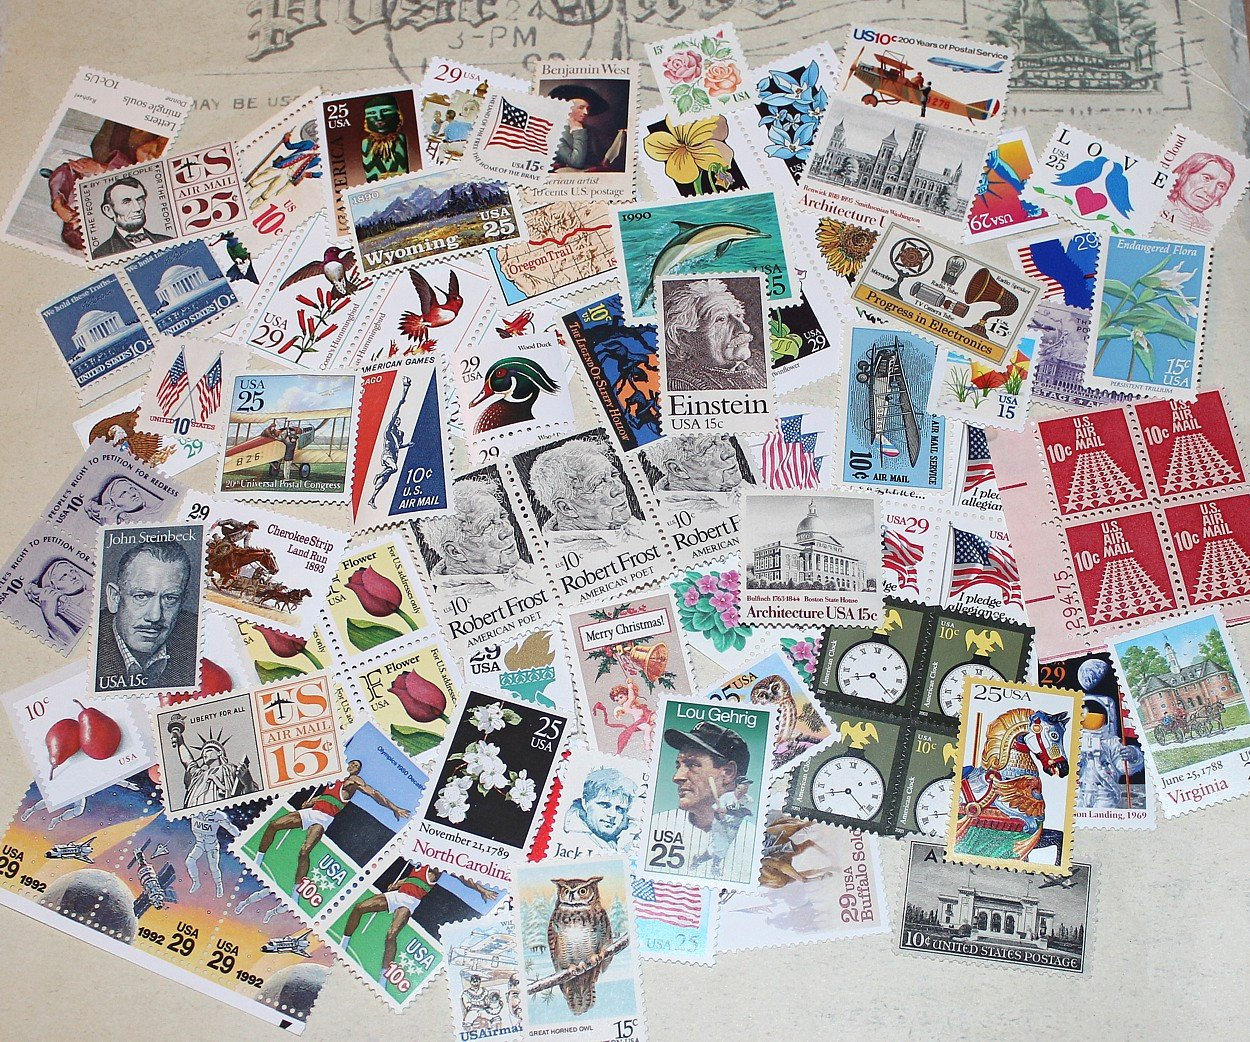 40 Unused Postage US Stamps Vintage / Collection of Curated US Postage  Stamps /values Range From 1 Cent to 29 Cents 